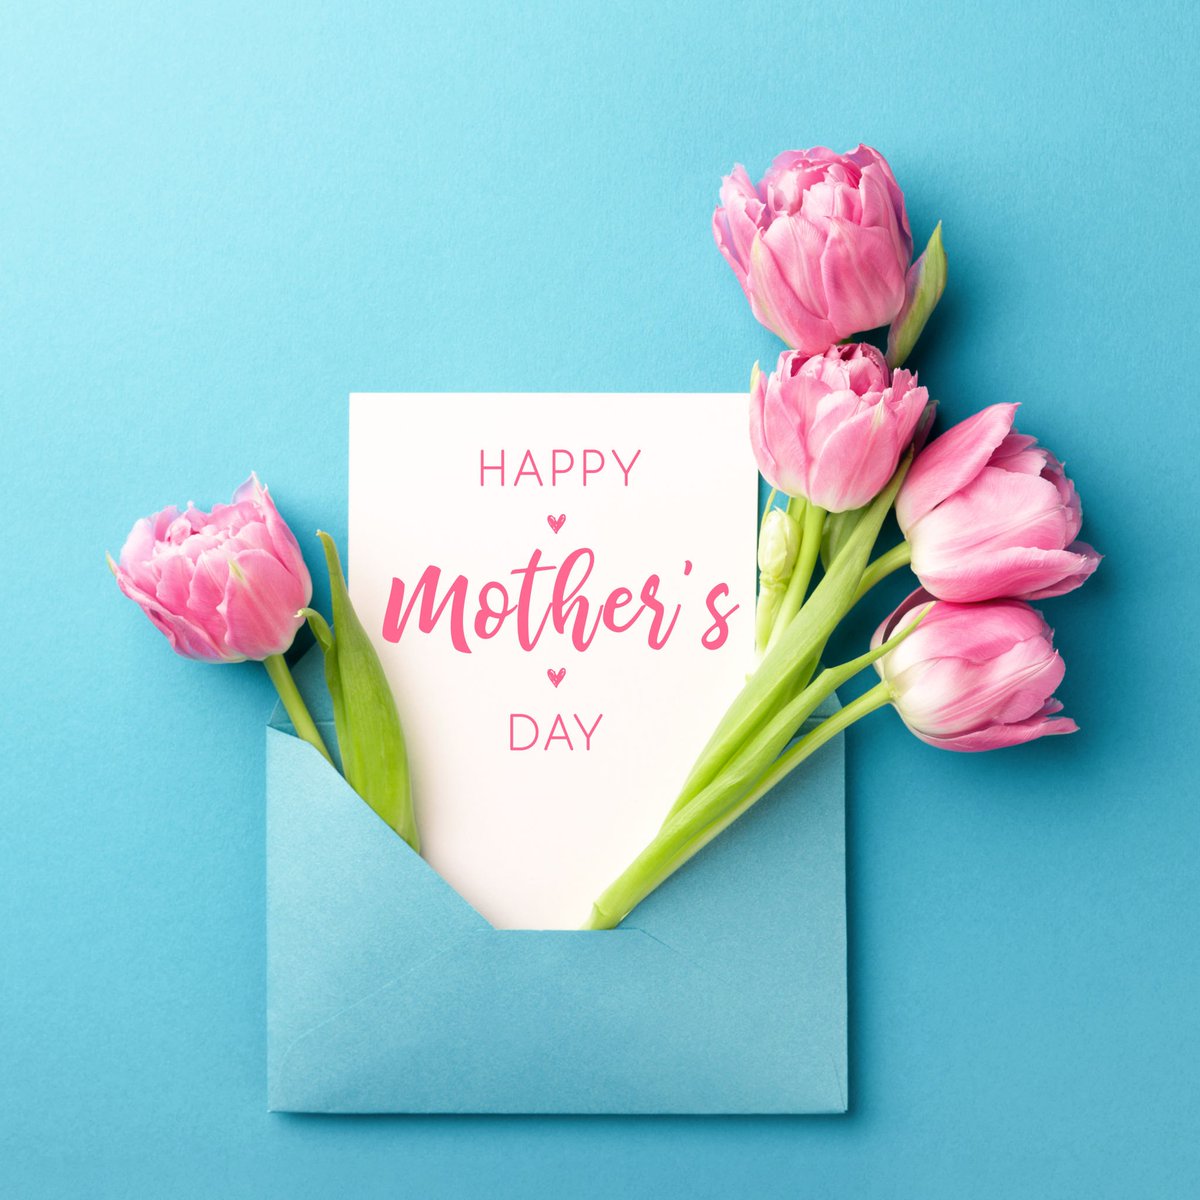 Happy Mother's Day to the one who taught me how to stand up, how to never give up, how to forgive, how to love and how to be strong no matter what. You are the reason why I am who I am today.
 #MothersDay #MomLove #FamilyFirst #MothersDay2021 ❤️💐👩‍👧👩‍👦🎁📦🎉